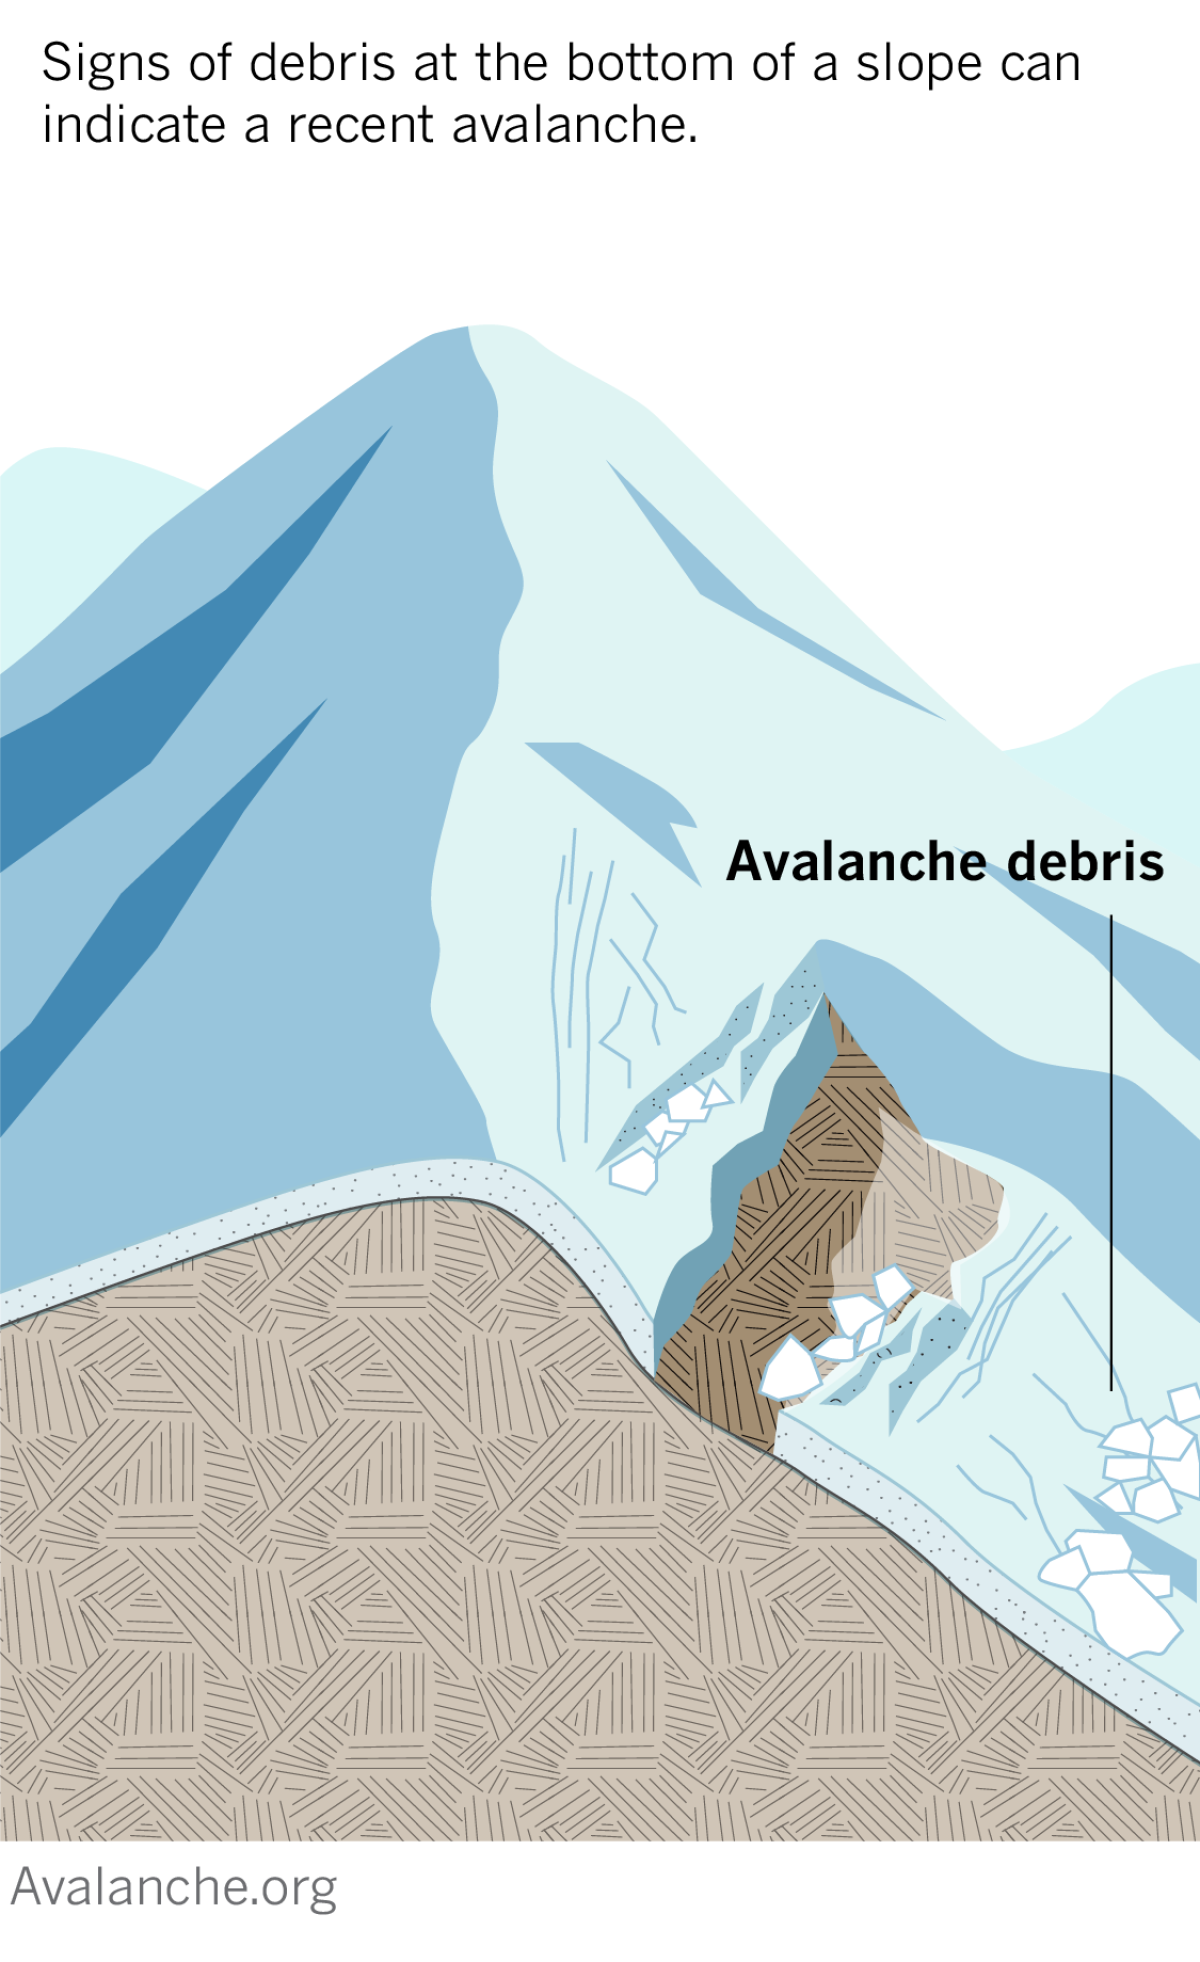 The diagram shows signs of debris at the bottom of a slope that may indicate a recent avalanche.